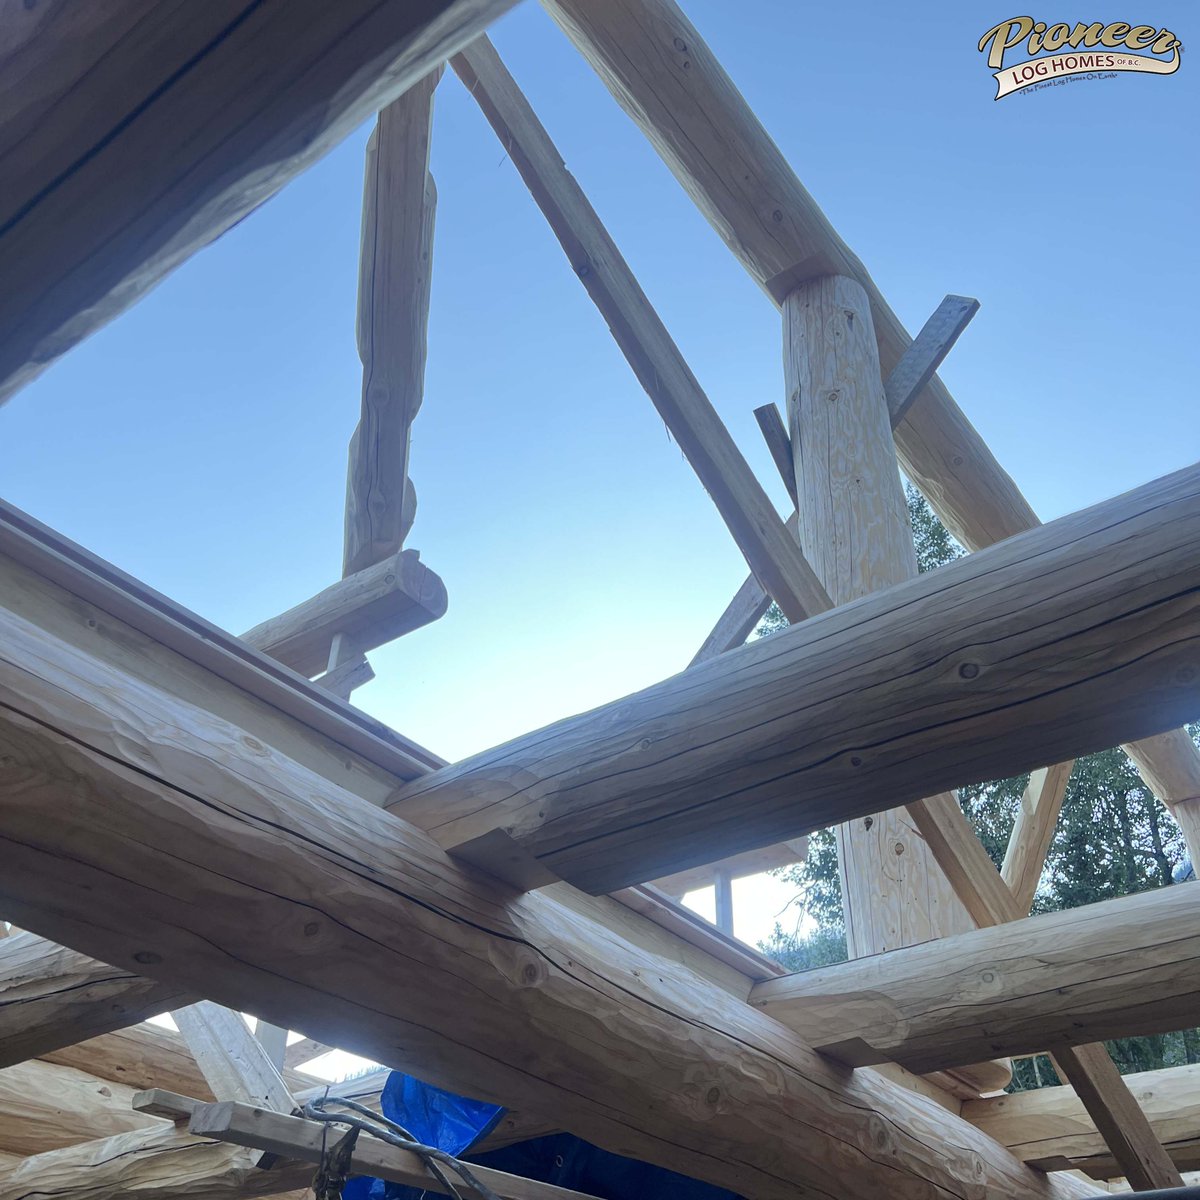 A one-of-a-kind dovetail addition to a mid-1900s heritage log home! We crafted the shell at our 153 Mile site, and scribed it on-site to fit with the existing log home. The build also featured two dollhouse dormers, as well as full-scribed floor joists! #pioneerloghomes #loghomes